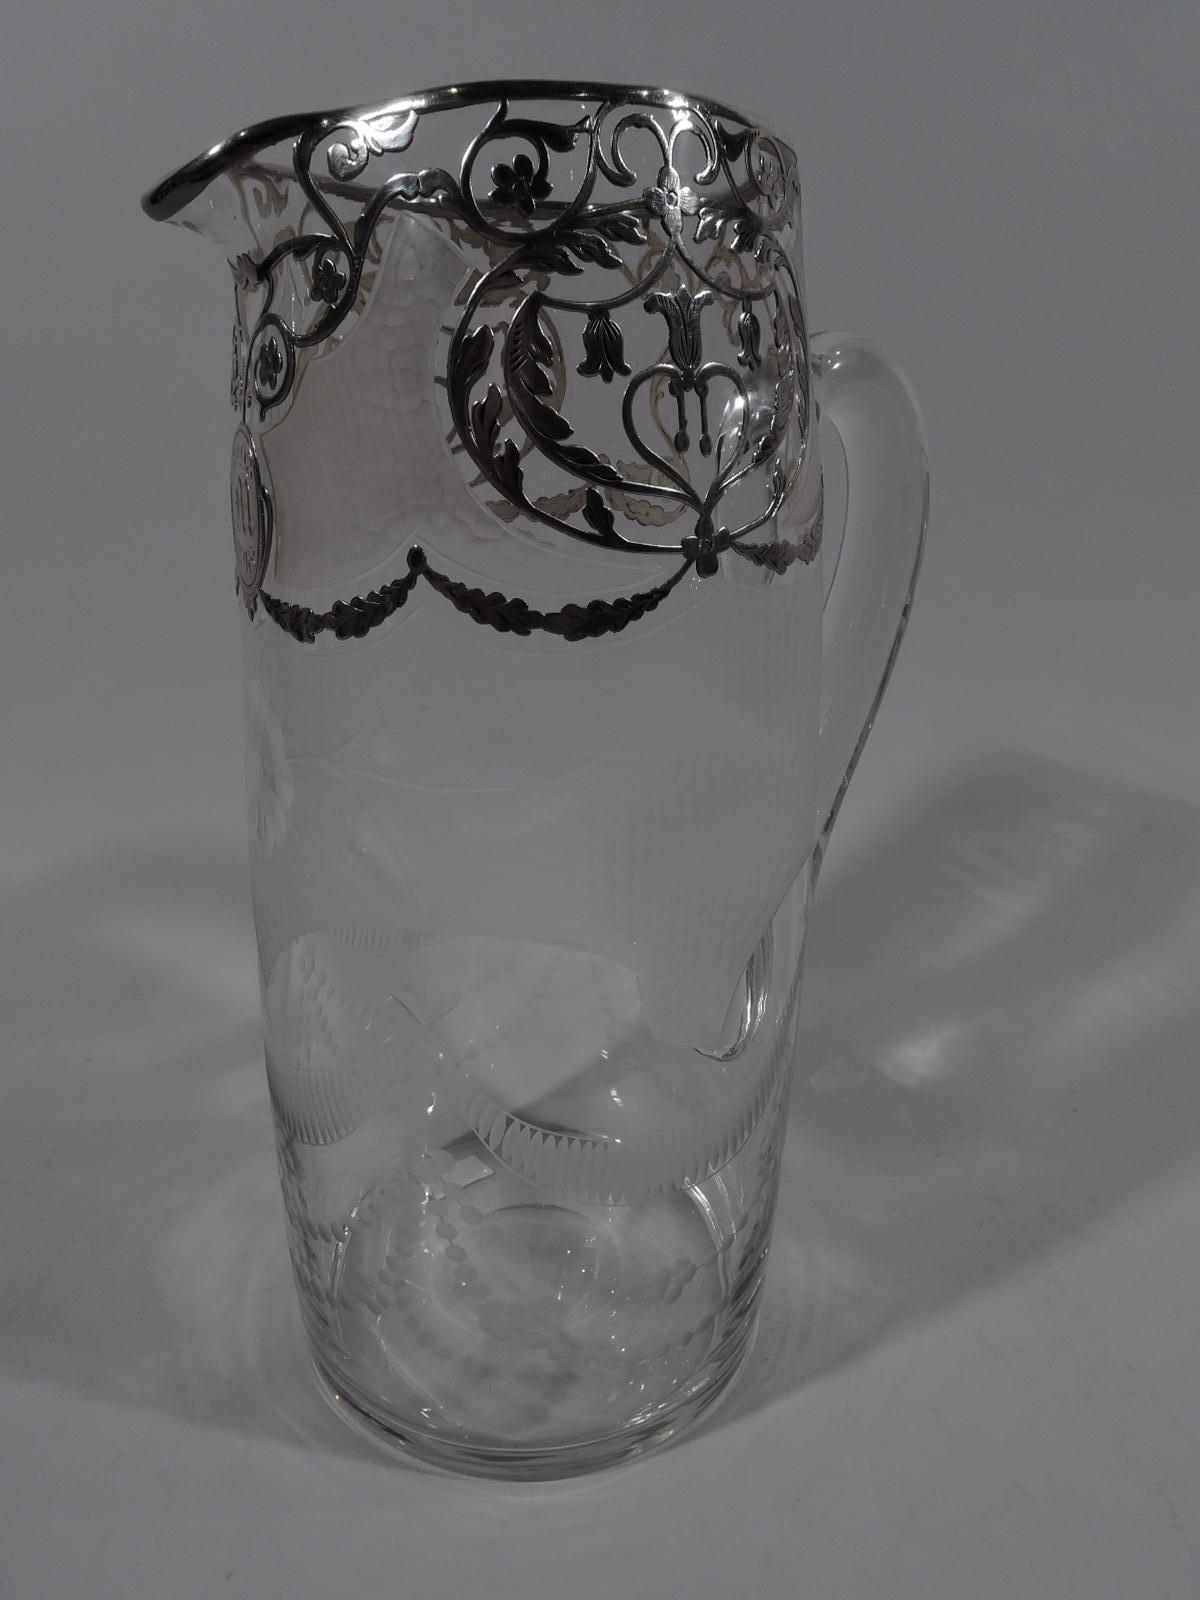 American Edwardian Regency claret jug, ca 1915. Curved cylinder with high-looping handle in clear glass with acid-etched ornament: stylized garland and flowers, and shaped fish-scale surrounding silver overlay in form of leafy scrolls and garland.